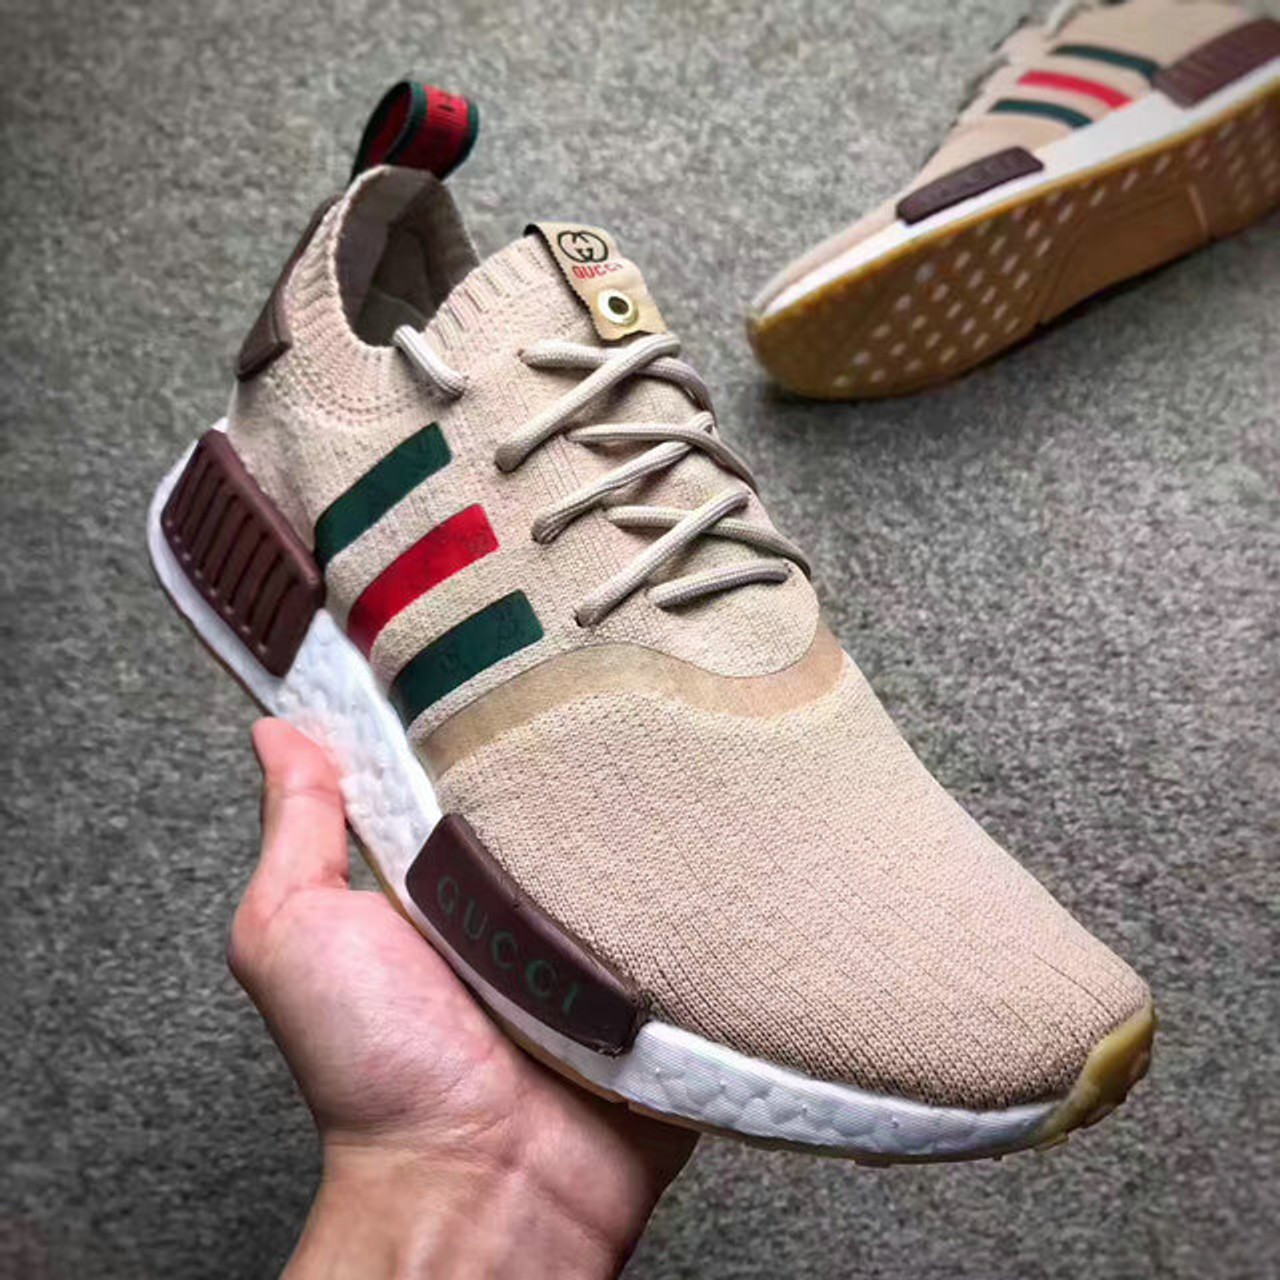 to buy the best stockX High quality replica UA Adidas NMD Supreme X LV X Gucci collab sneaker Hypedripz is the best high quality trusted replica fake designer hypebeast